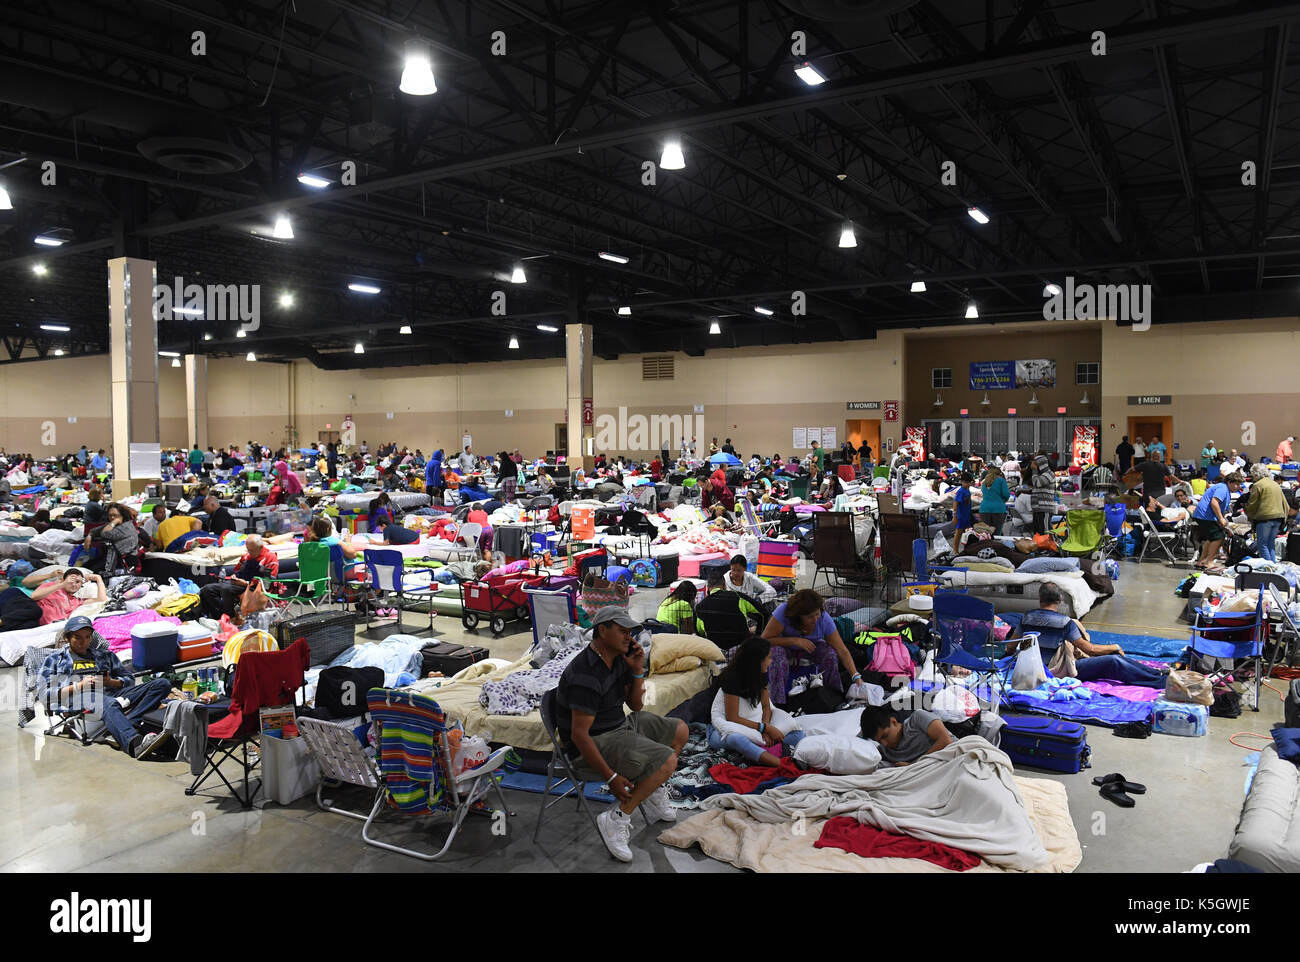 Miami, USA. 9th Sep, 2017. People are seen at a shelter at the Miami-Dade County Fair Expo Center in Miami, as hurricane 'Irma' is approaching, in Miami, Florida, the United States, Sept. 9, 2017. About 5.6 million people in Florida have been ordered to evacuate, while 54,000 Floridians have taken shelter in 320 shelters across Florida. Forecasters expect the hurricane to hit Florida early Sunday morning. Credit: Yin Bogu/Xinhua/Alamy Live News Stock Photo